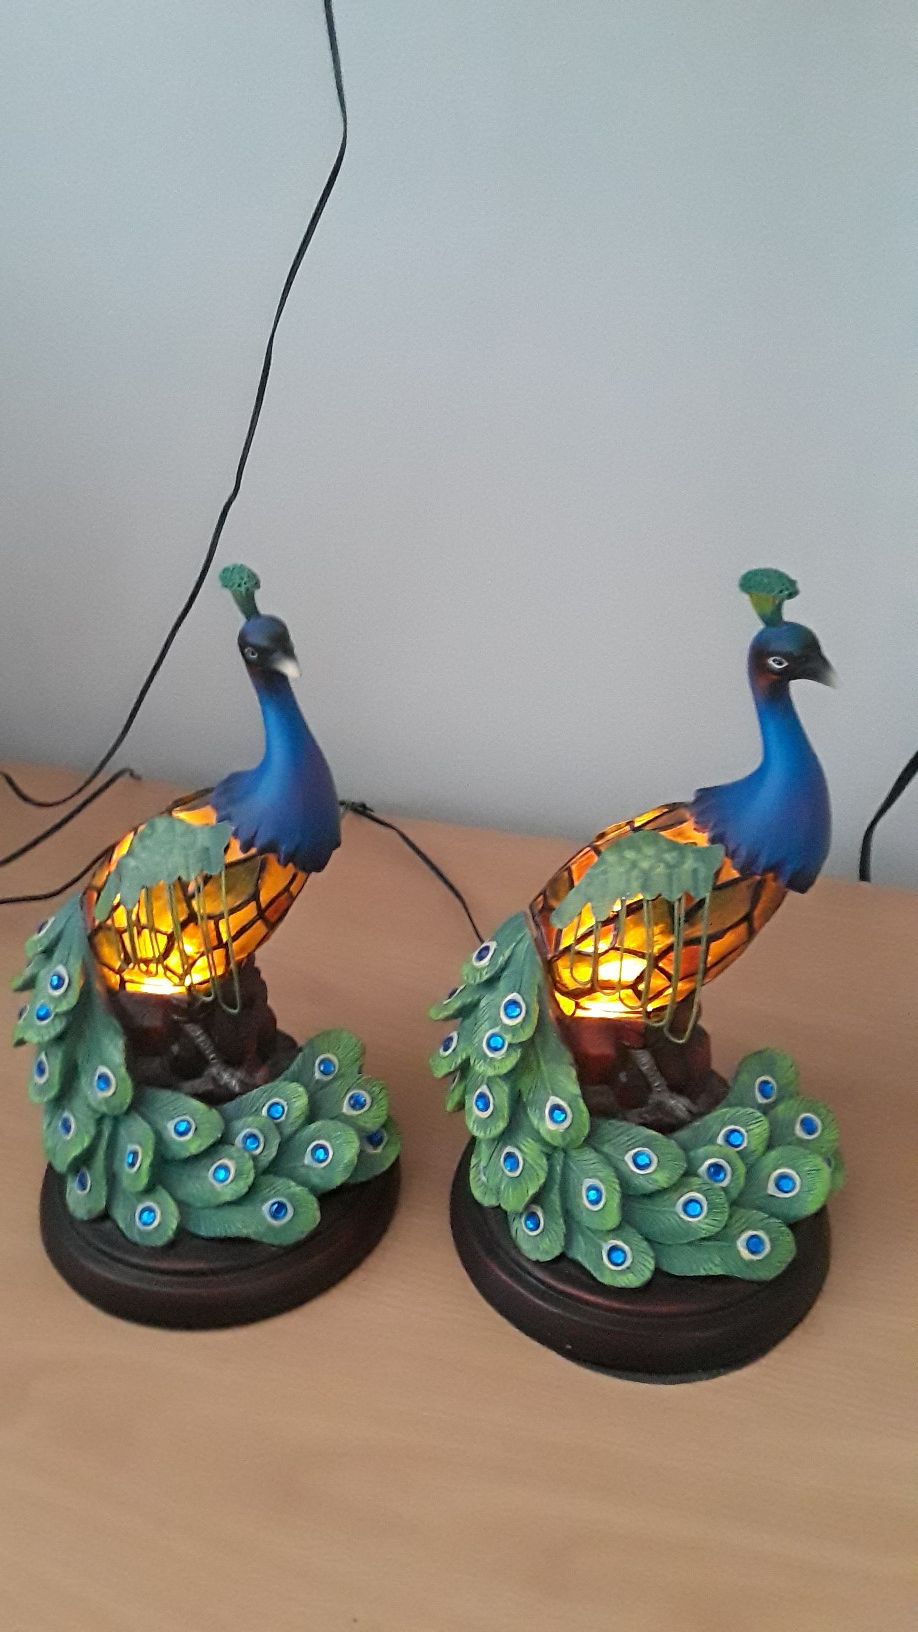 Vintage Staind Glass Peacock Lamps